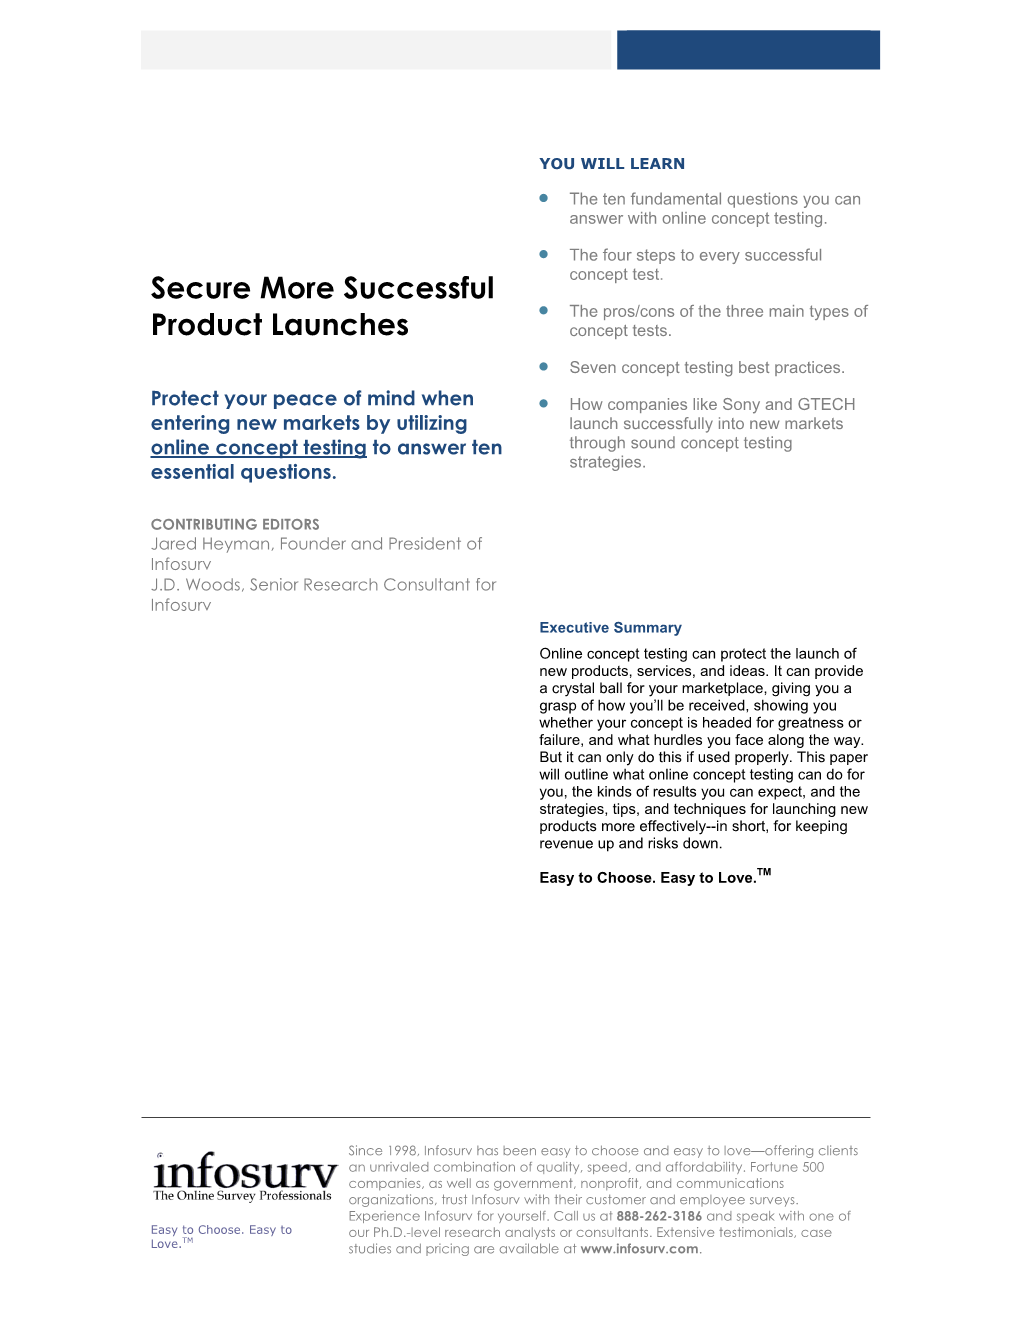 Secure More Successful Product Launches